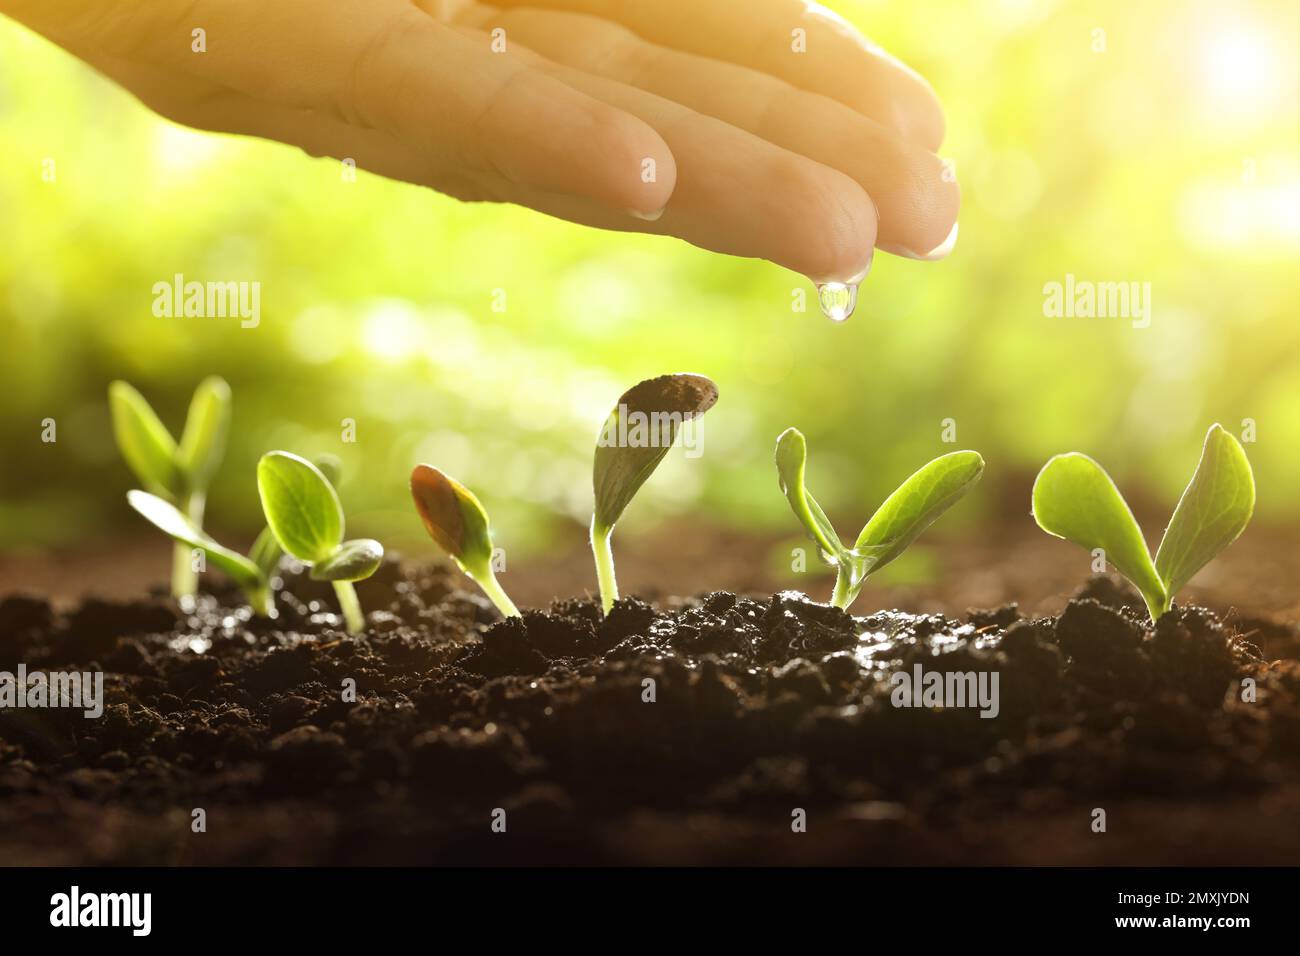 Woman pouring water on young vegetable plants grown from seeds in soil, closeup Stock Photo